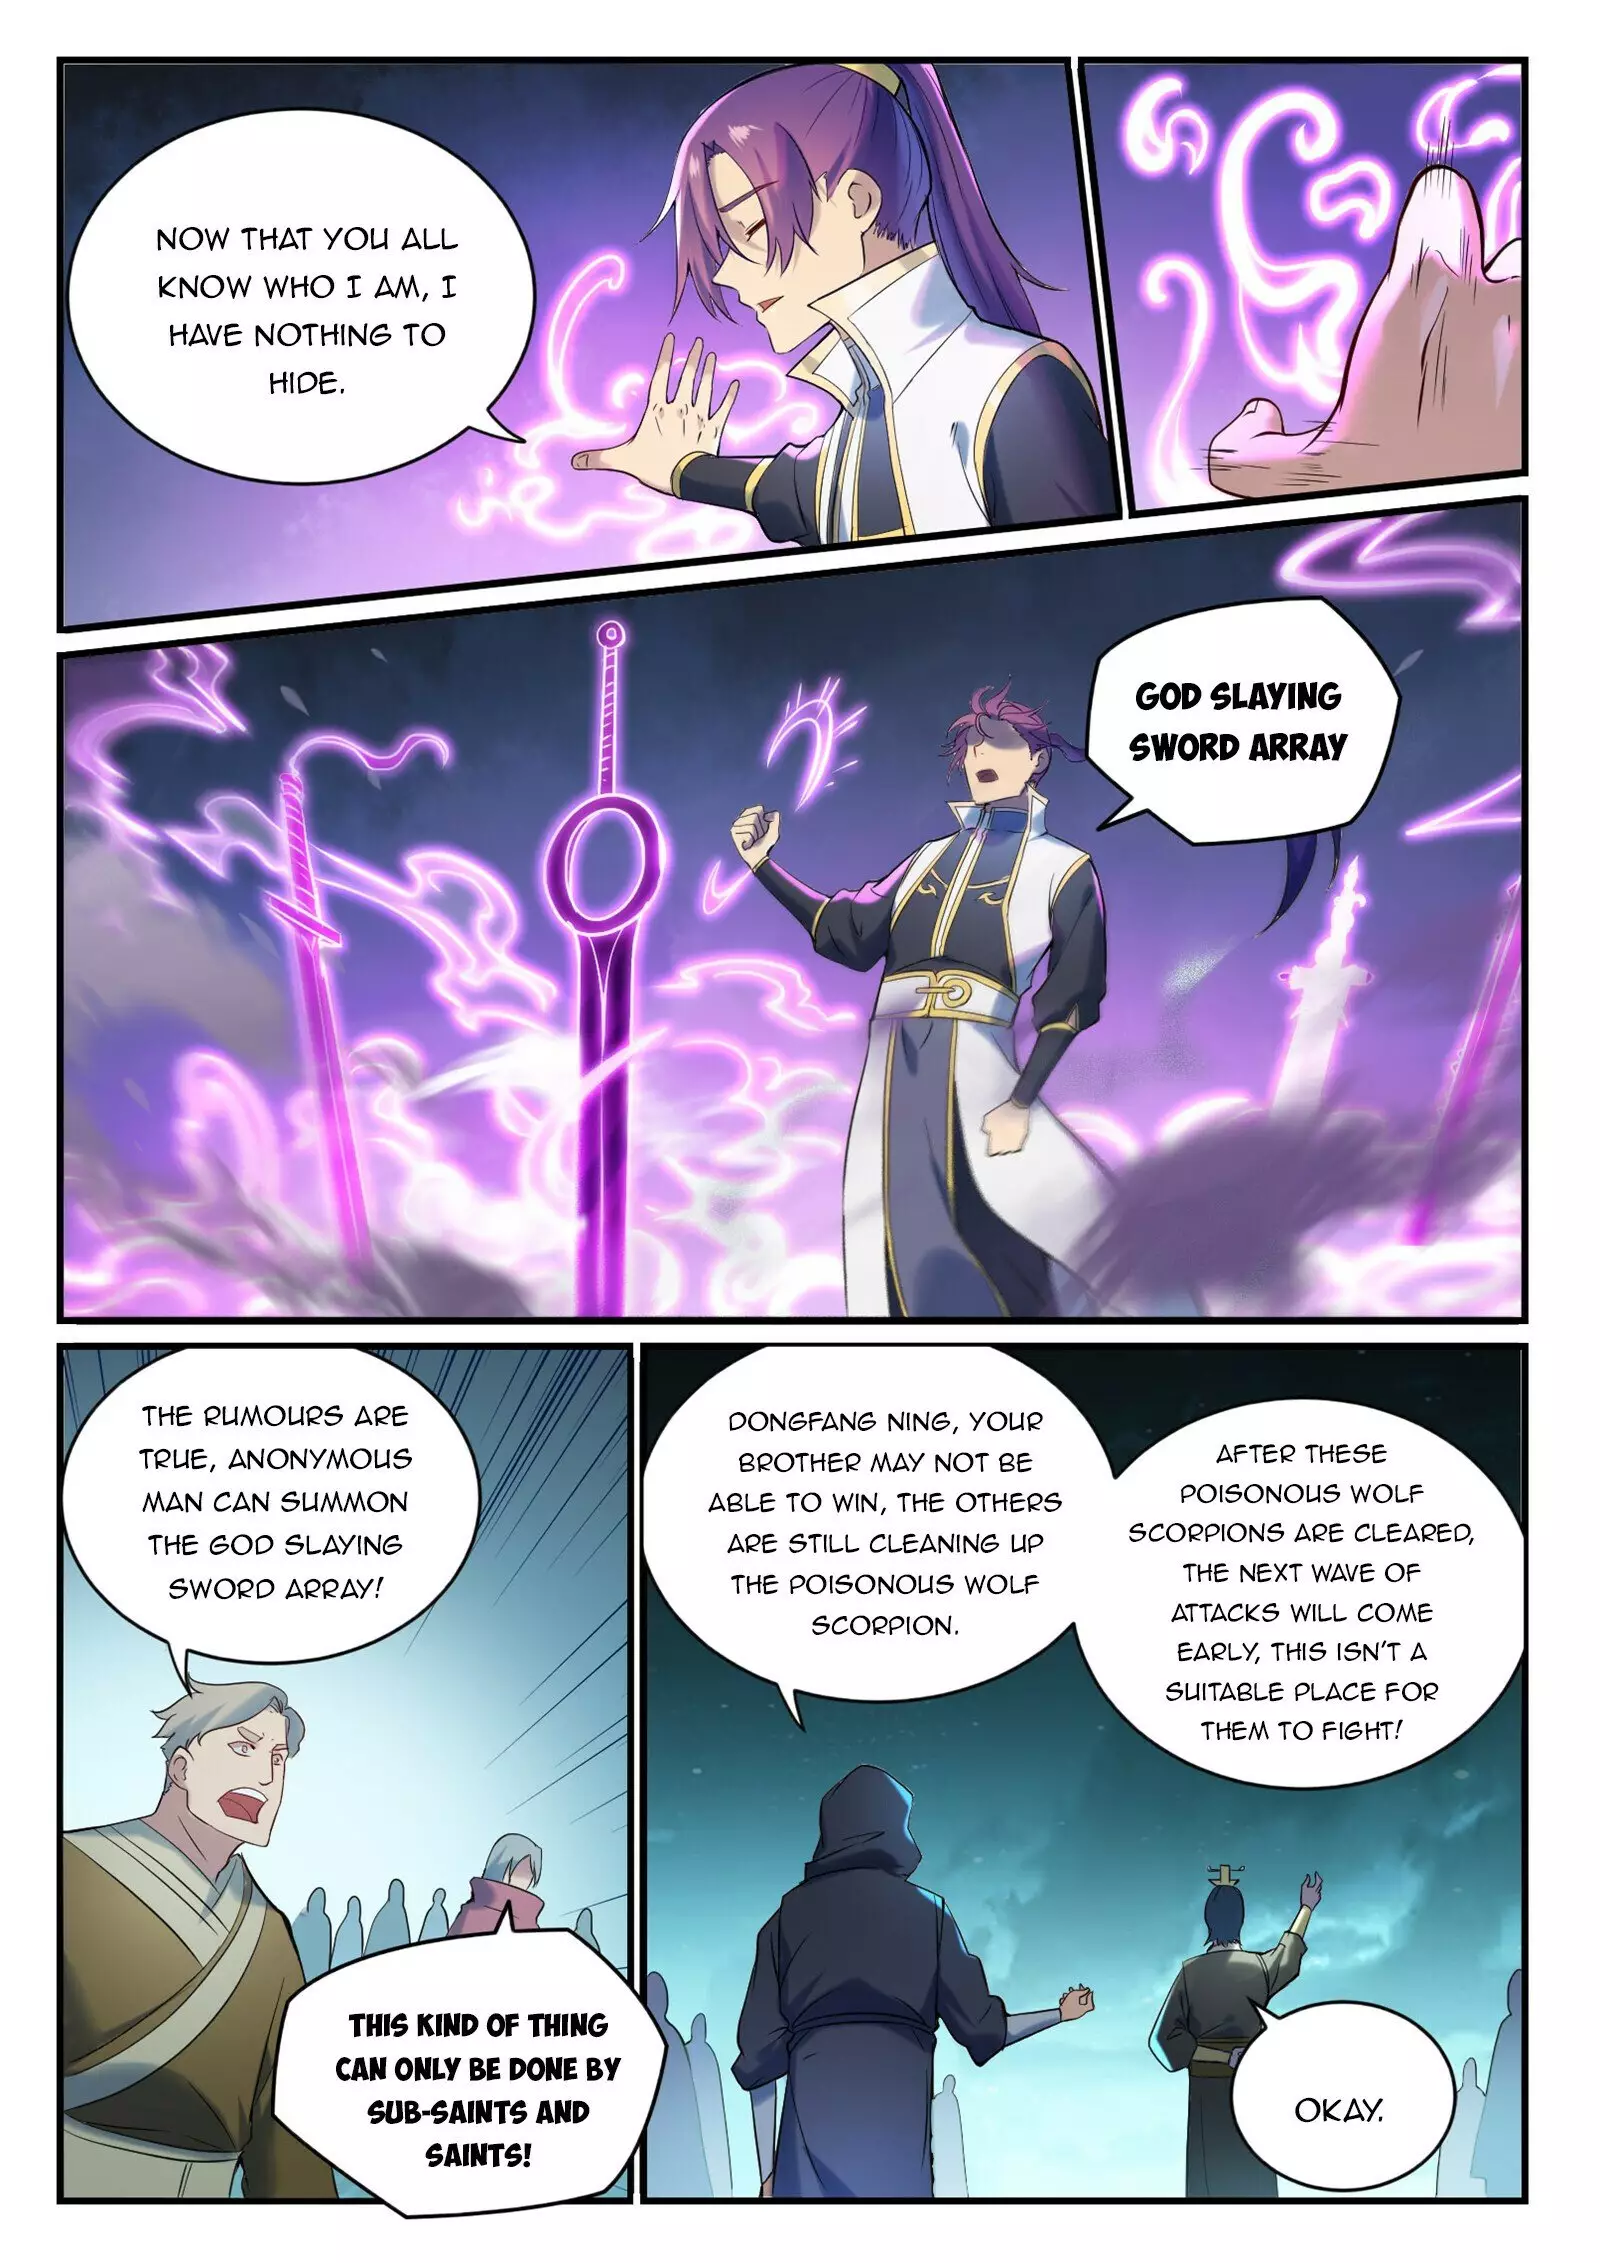 Apotheosis - Elevation to the status of a god - 914 page 4-16fc5d18